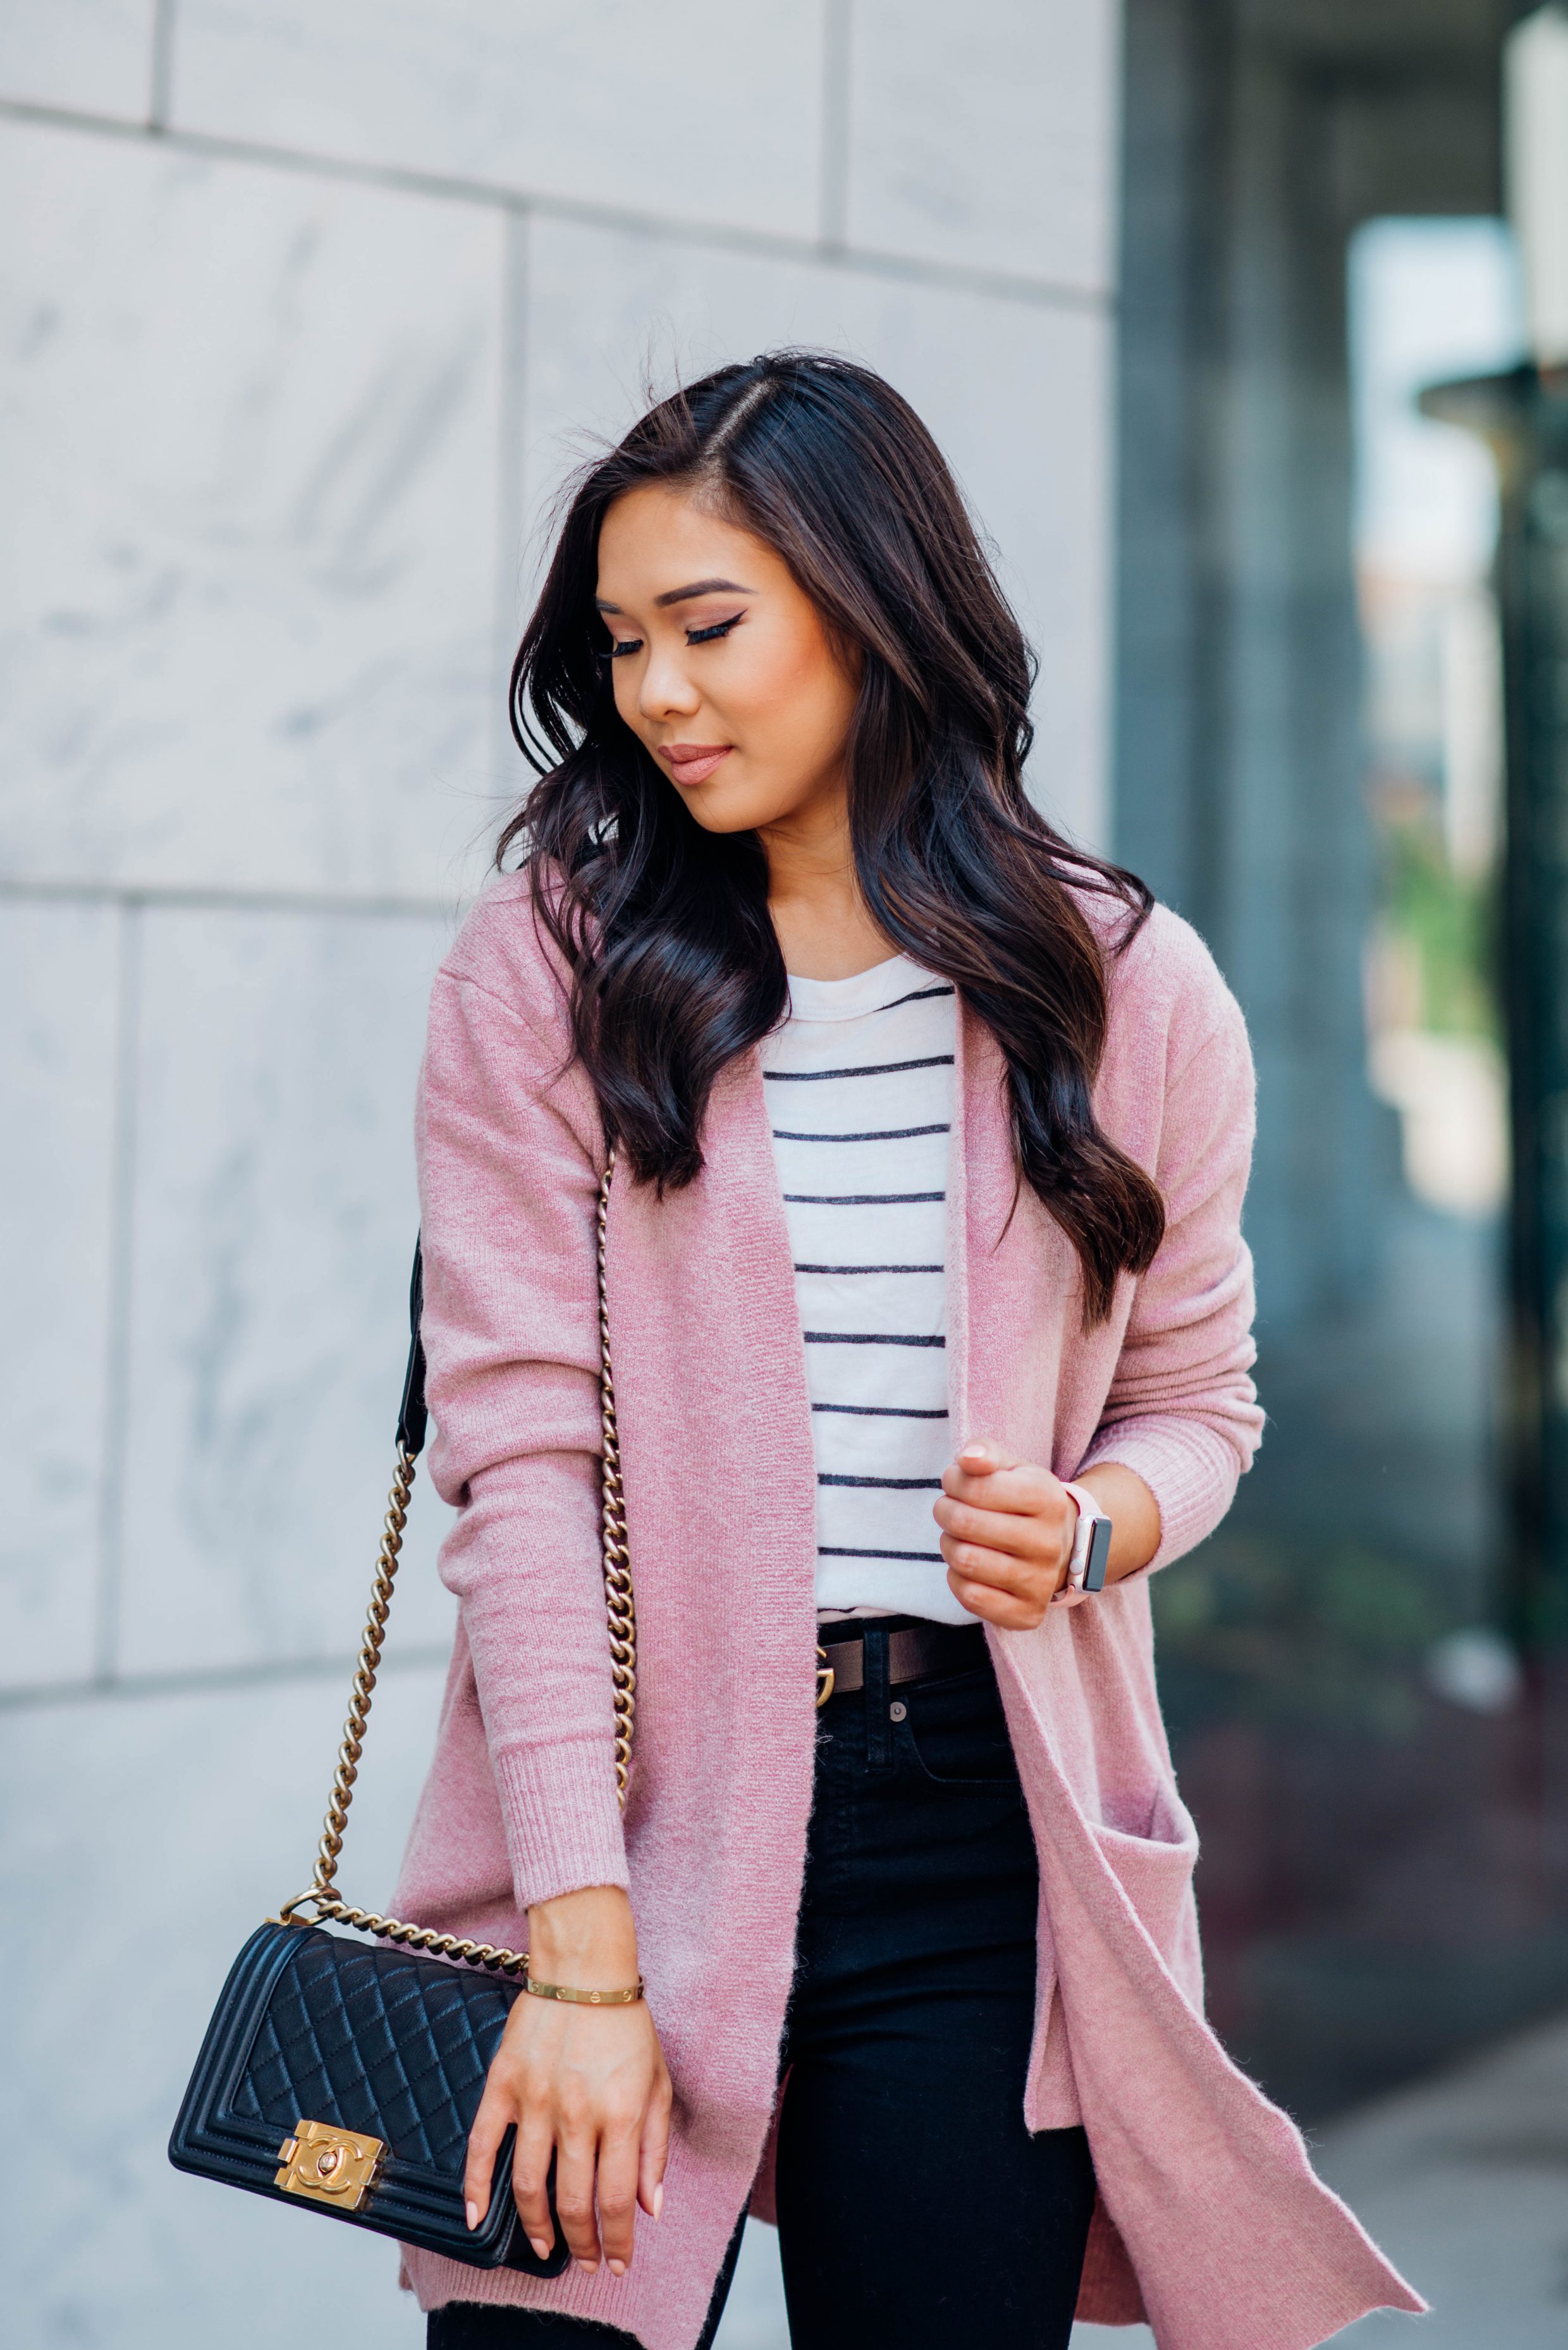 Easy fall look with a striped tee, blush cardigan and black jeans